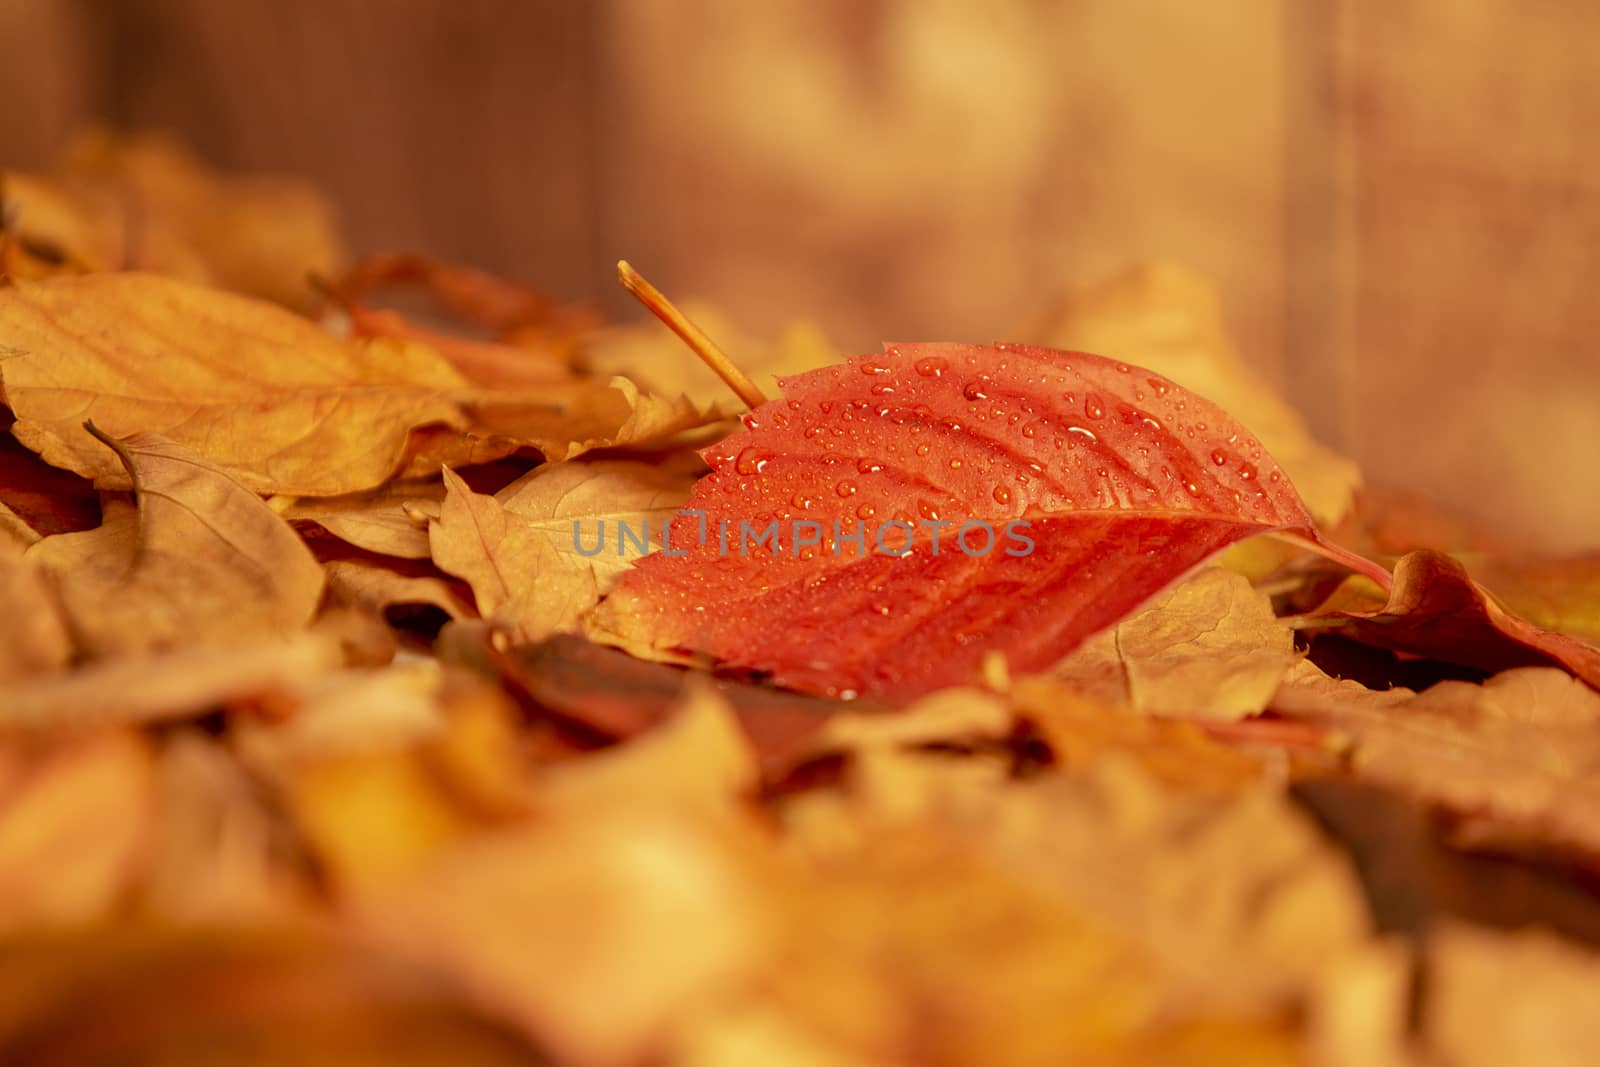 Autumn in orange: angle view close up of a red Virginia creeper (Parthenocissus quinquefolia) leaf on pile of dry leaves and wooden background by robbyfontanesi